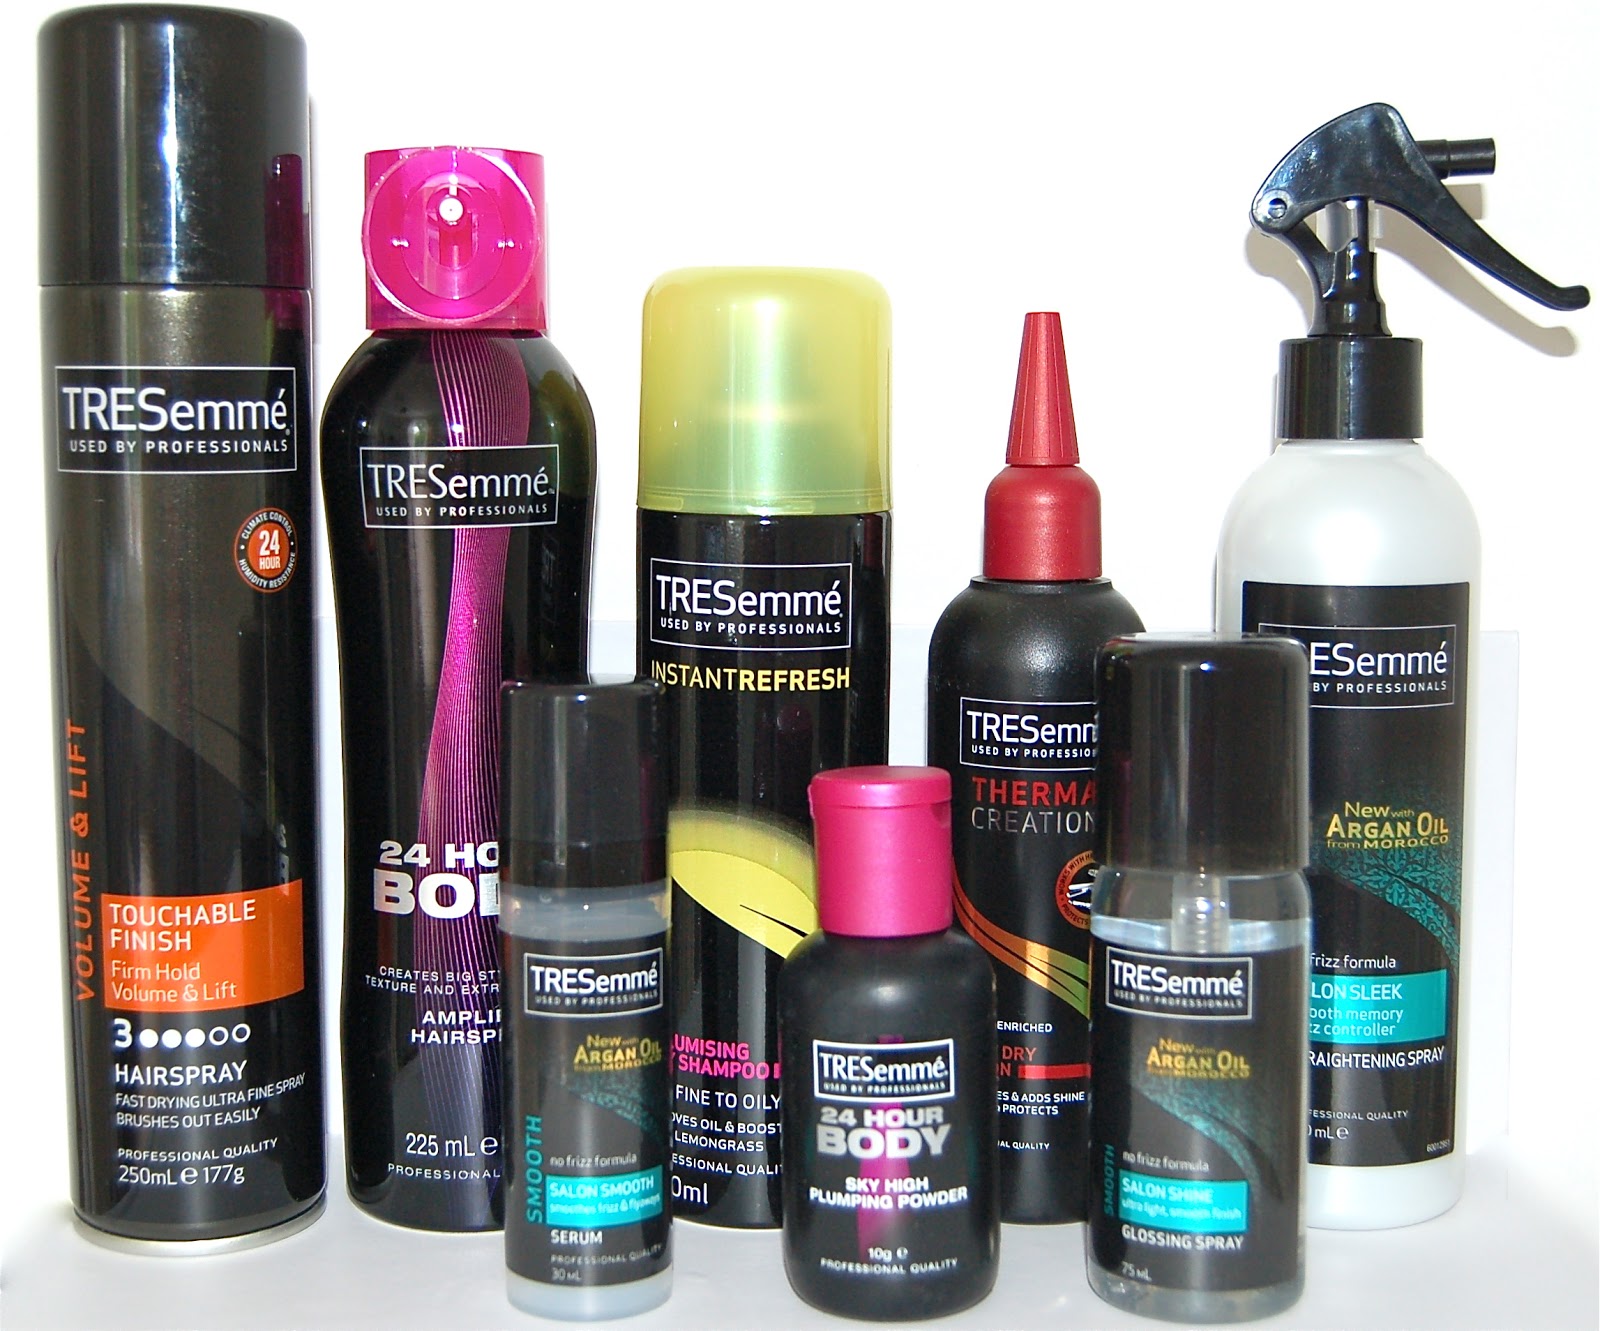 Who makes TRESemme products?